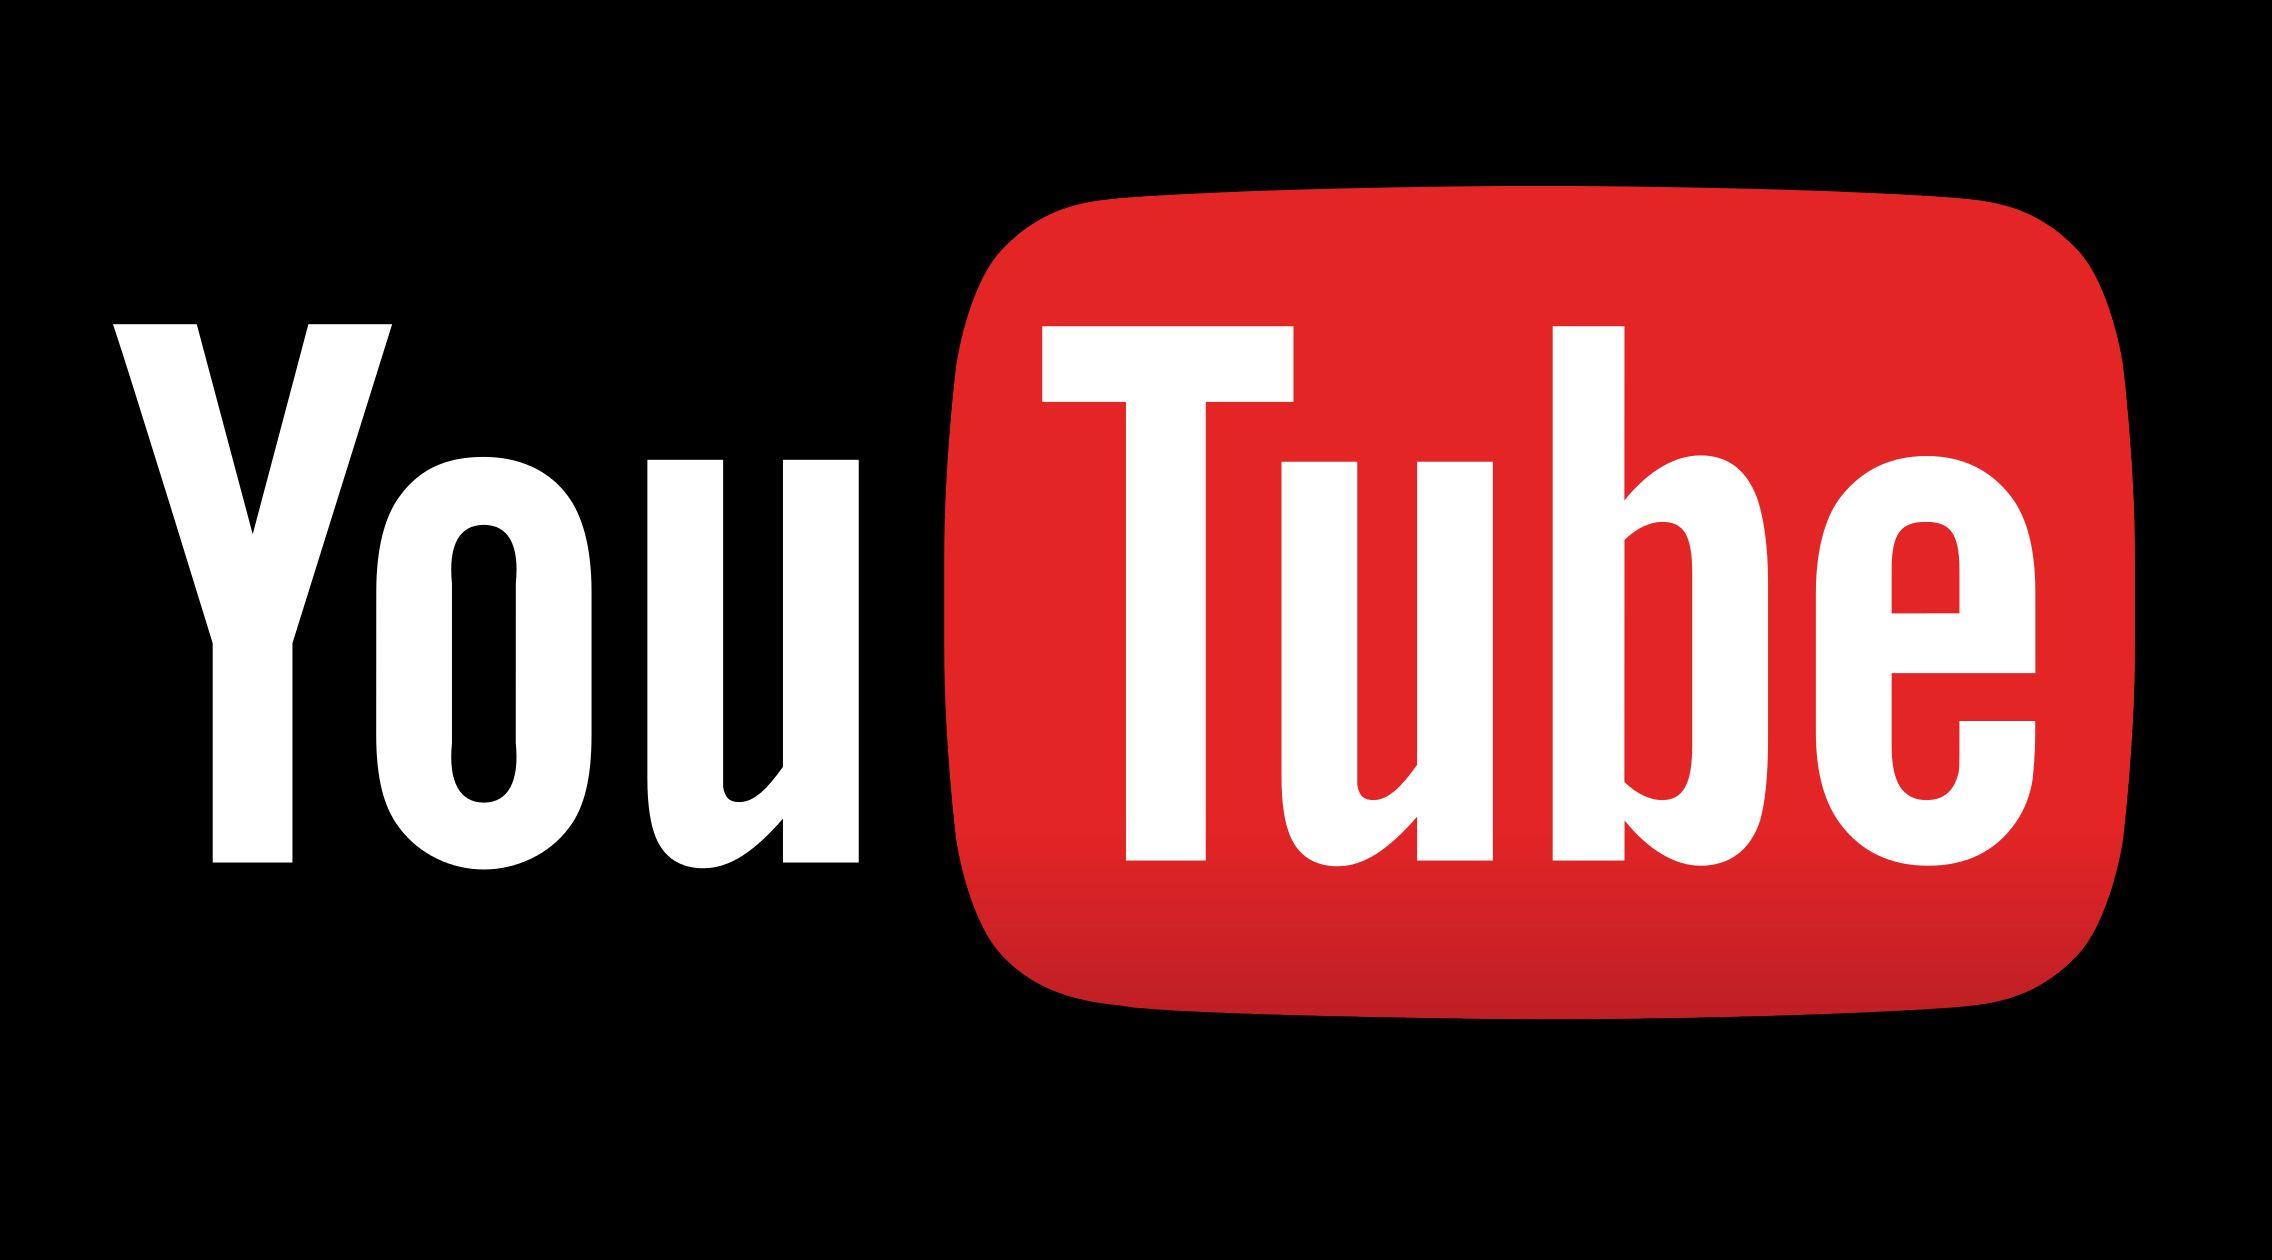 2017 New YouTube Logo - YouTube Logo, YouTube Symbol, Meaning, History and Evolution